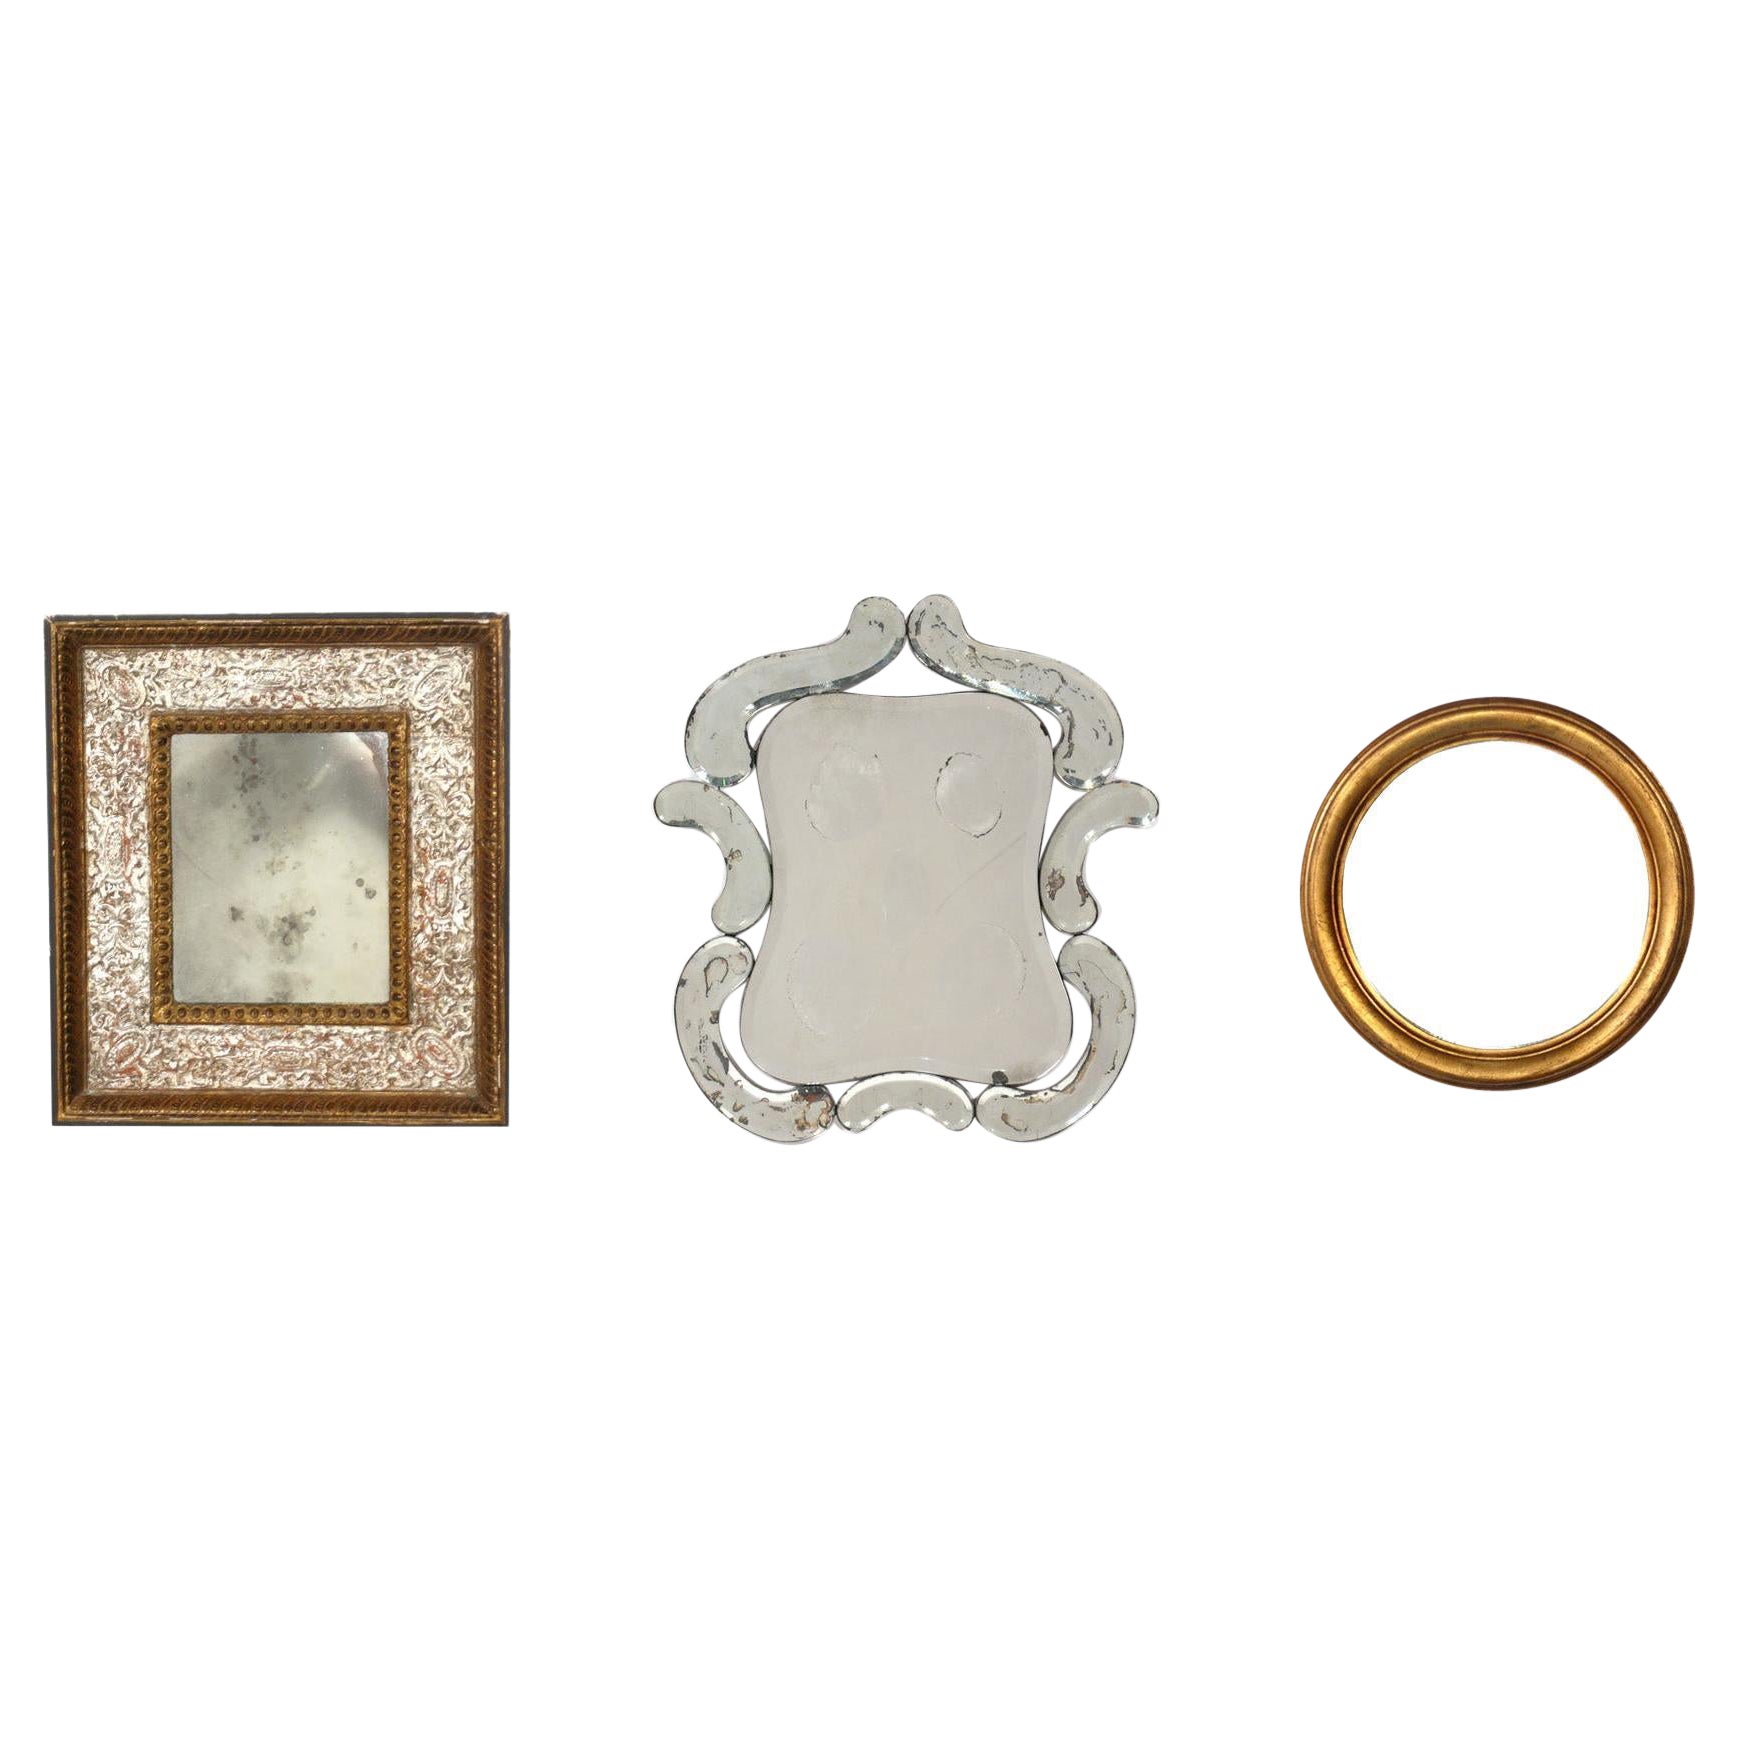 Selection of Petite Mirrors